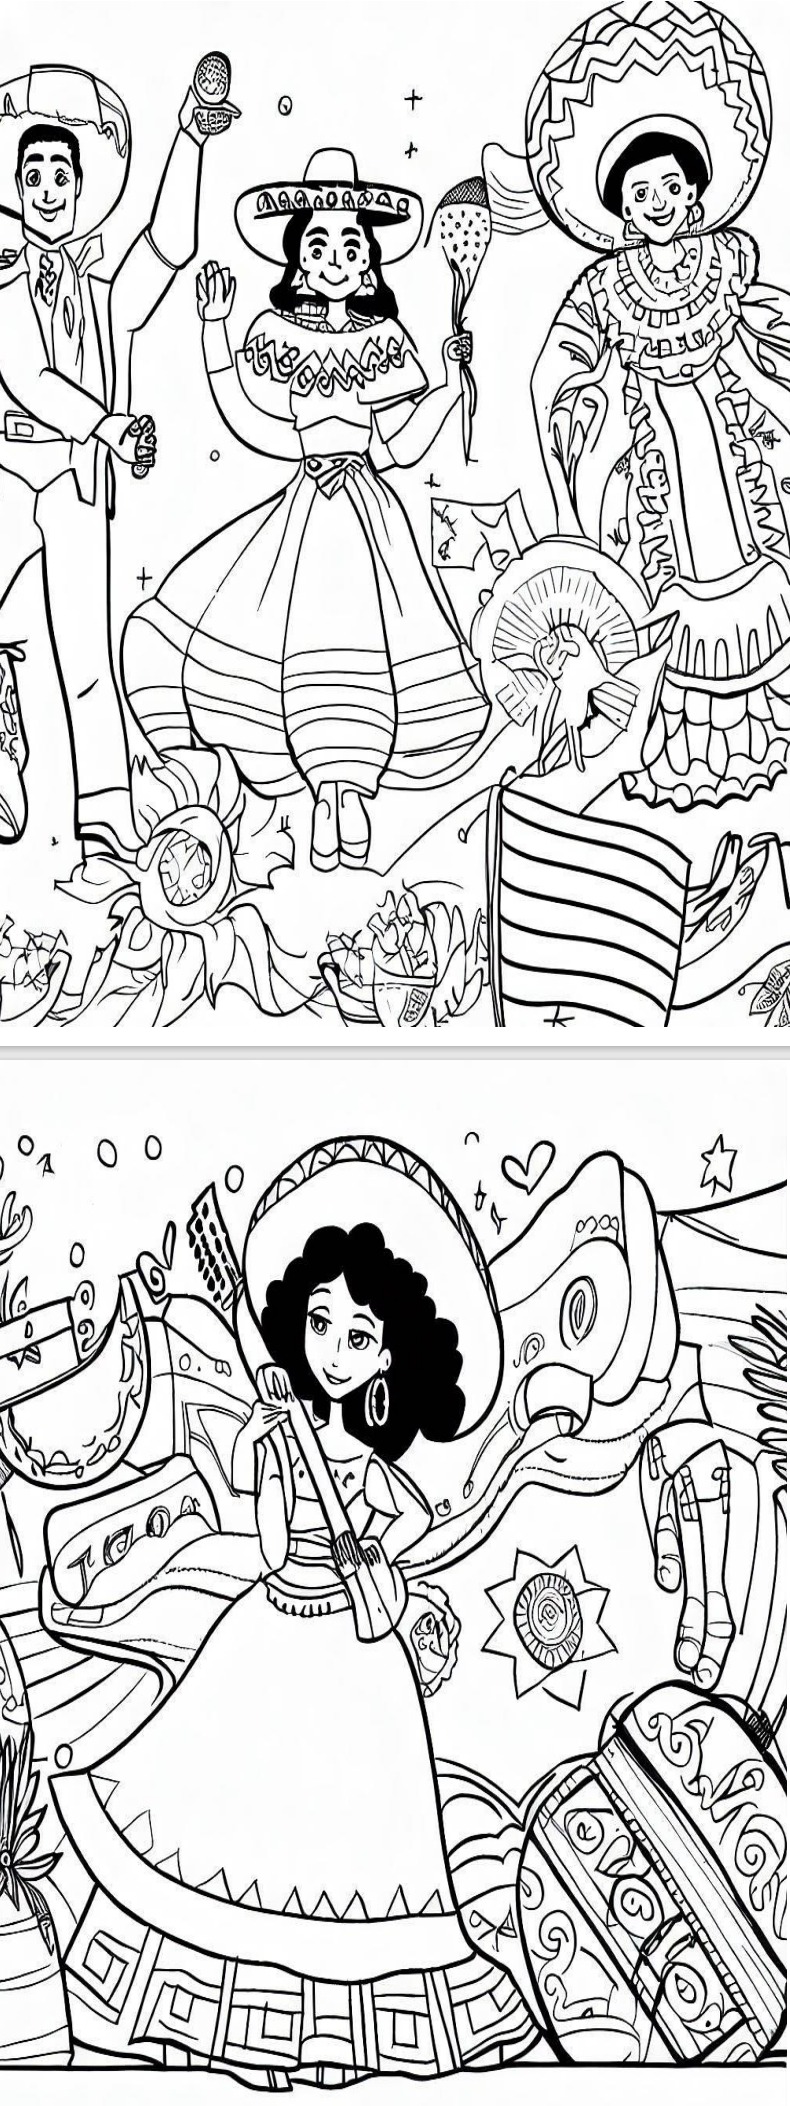 Hispanic heritage month coloring pages hispanic heritage month coloring sheets made by teachers